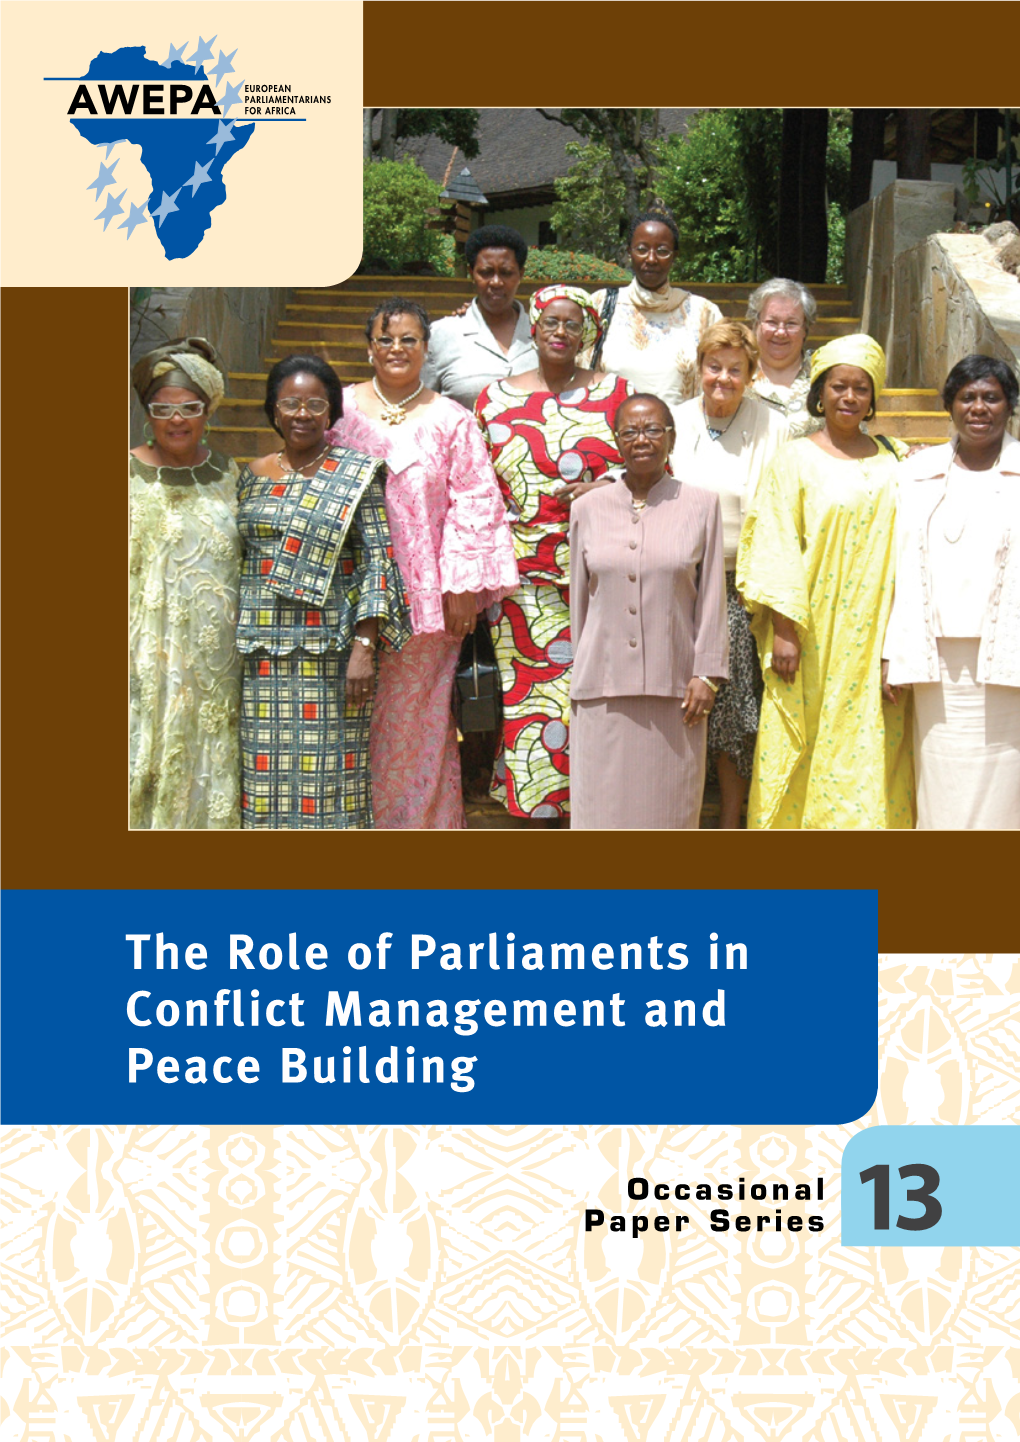 The Role of Parliaments in Conflict Management and Peace Building Peace and Management Conflict in Parliaments of Role The